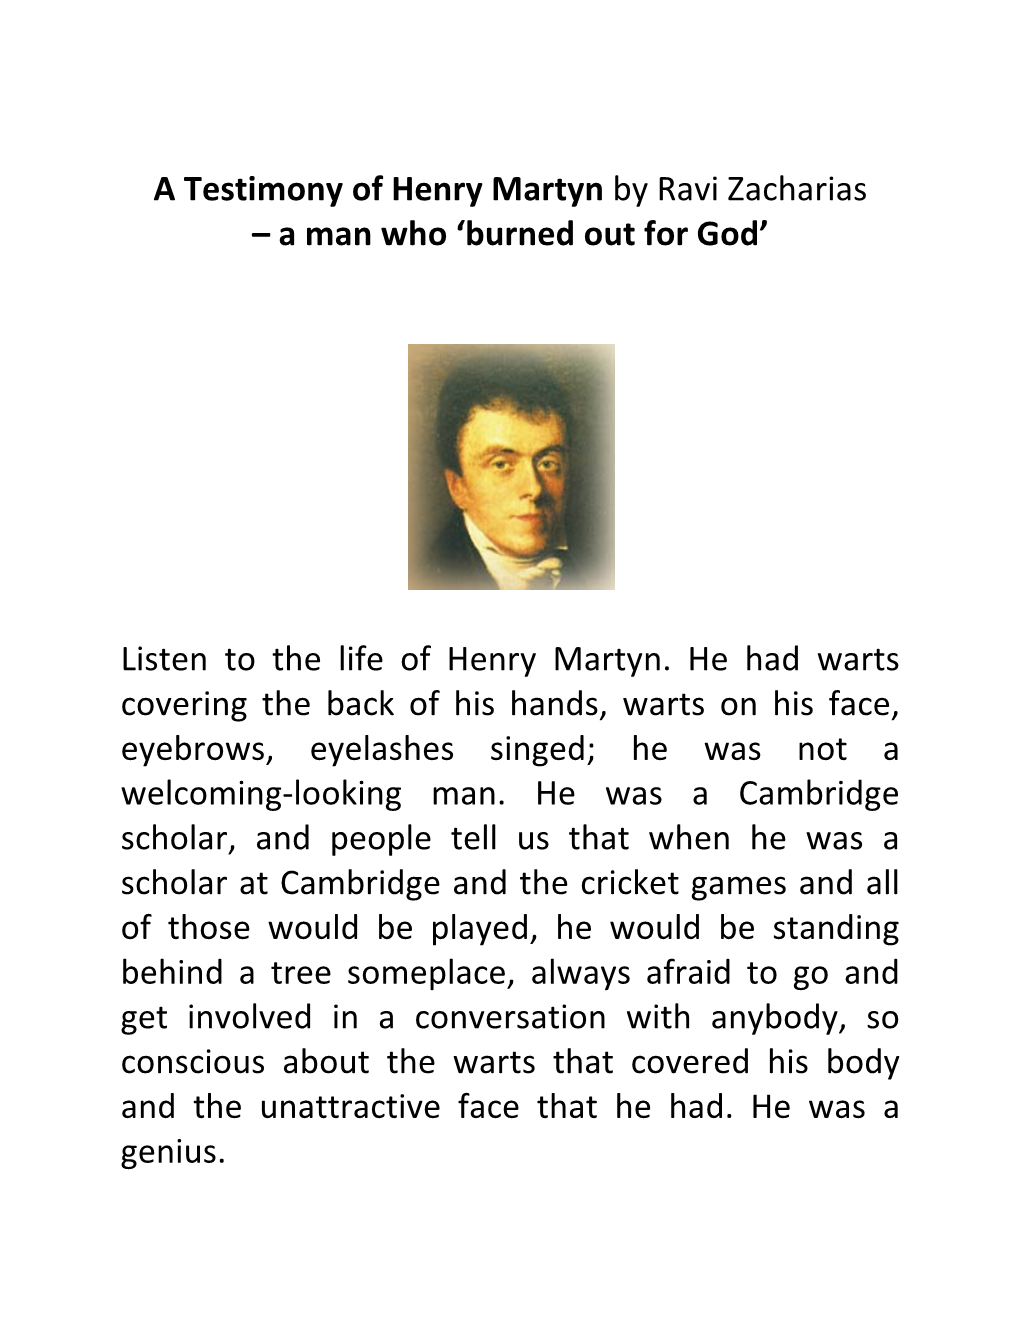 A Testimony of Henry Martyn by Ravi Zacharias – a Man Who 'Burned Out